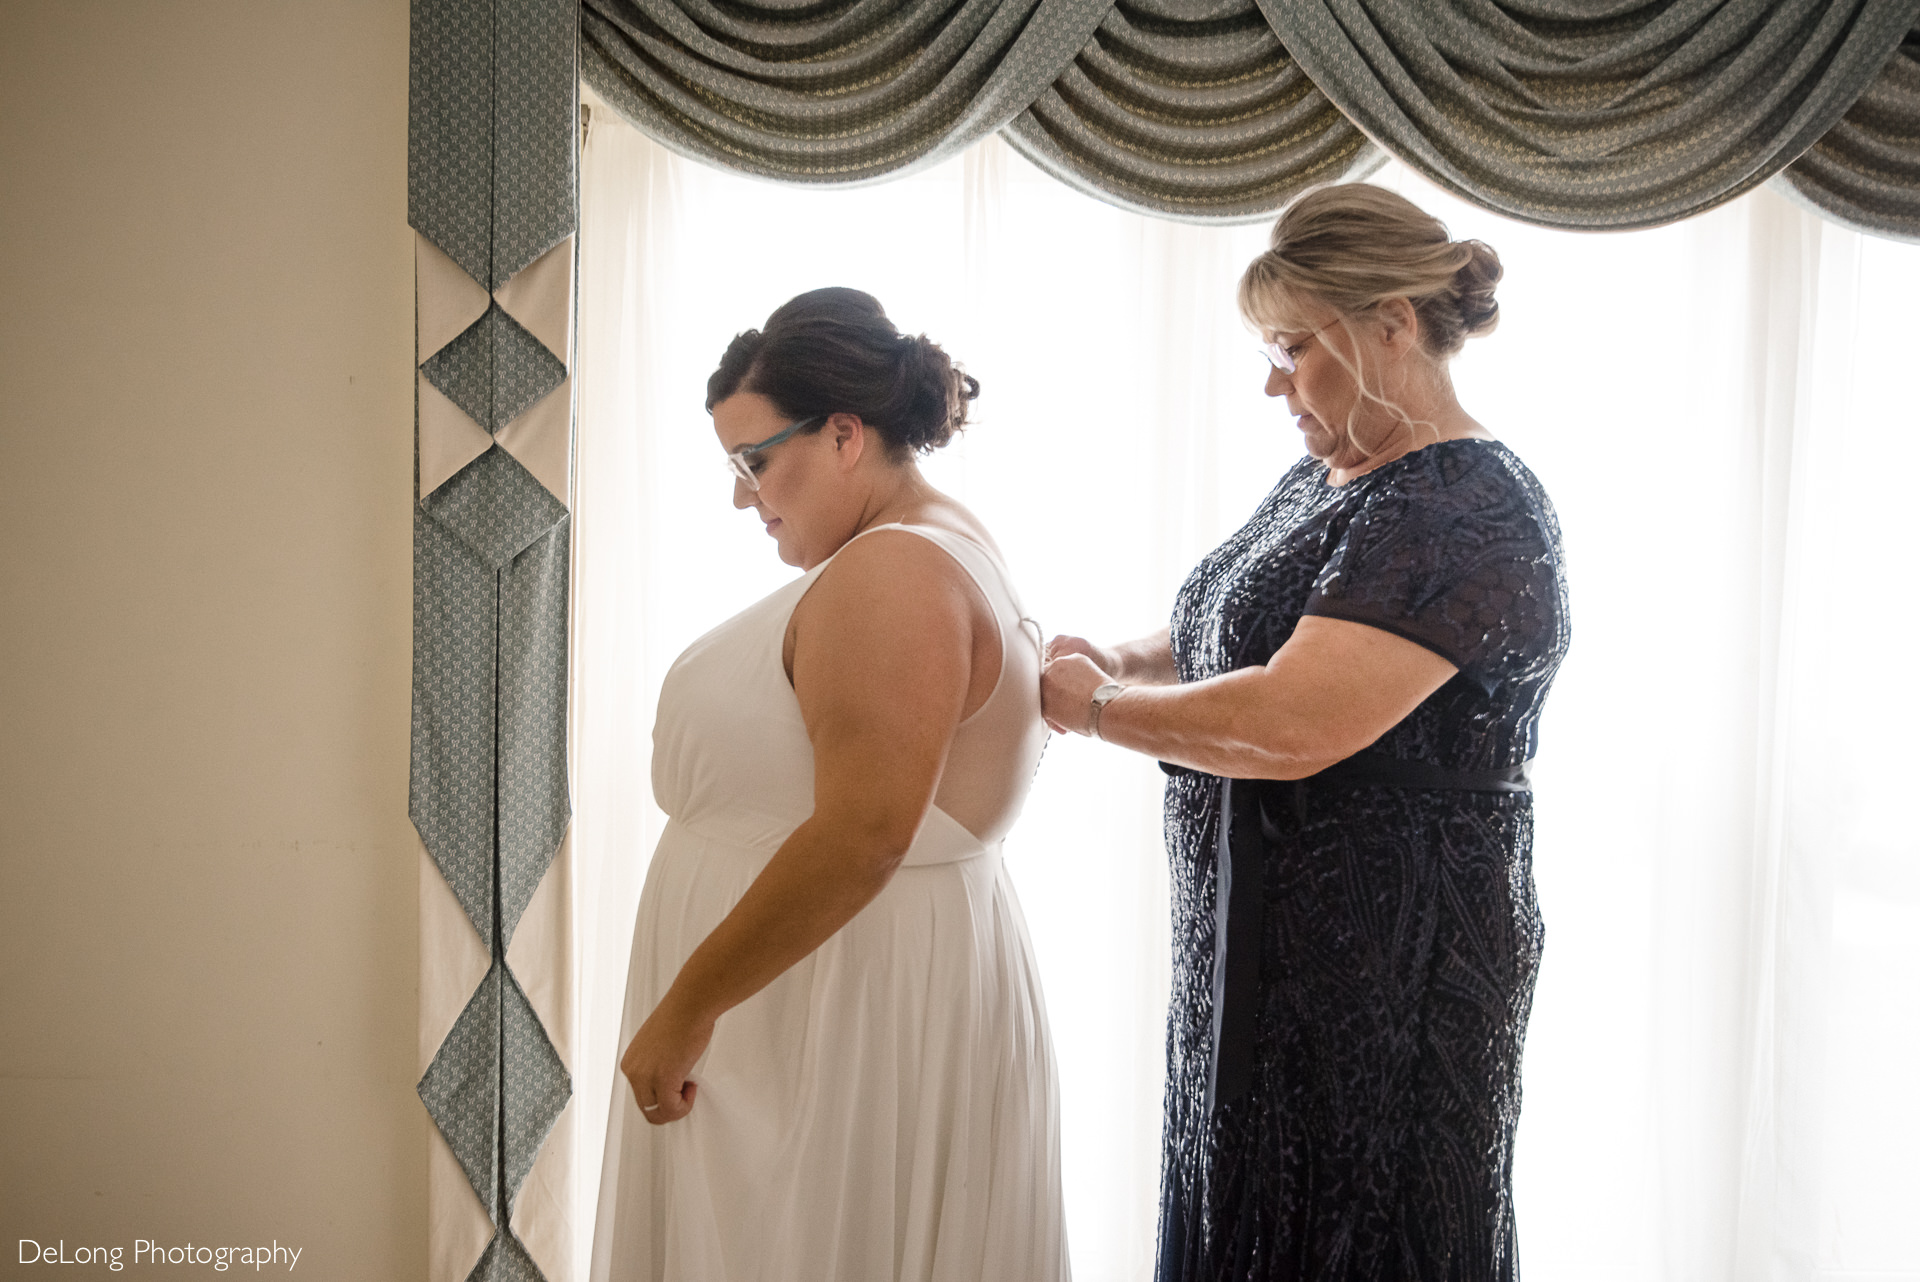 Bride having her dress buttoned up by her mother near a window at the Island House by Charlotte Wedding Photographers DeLong Photography